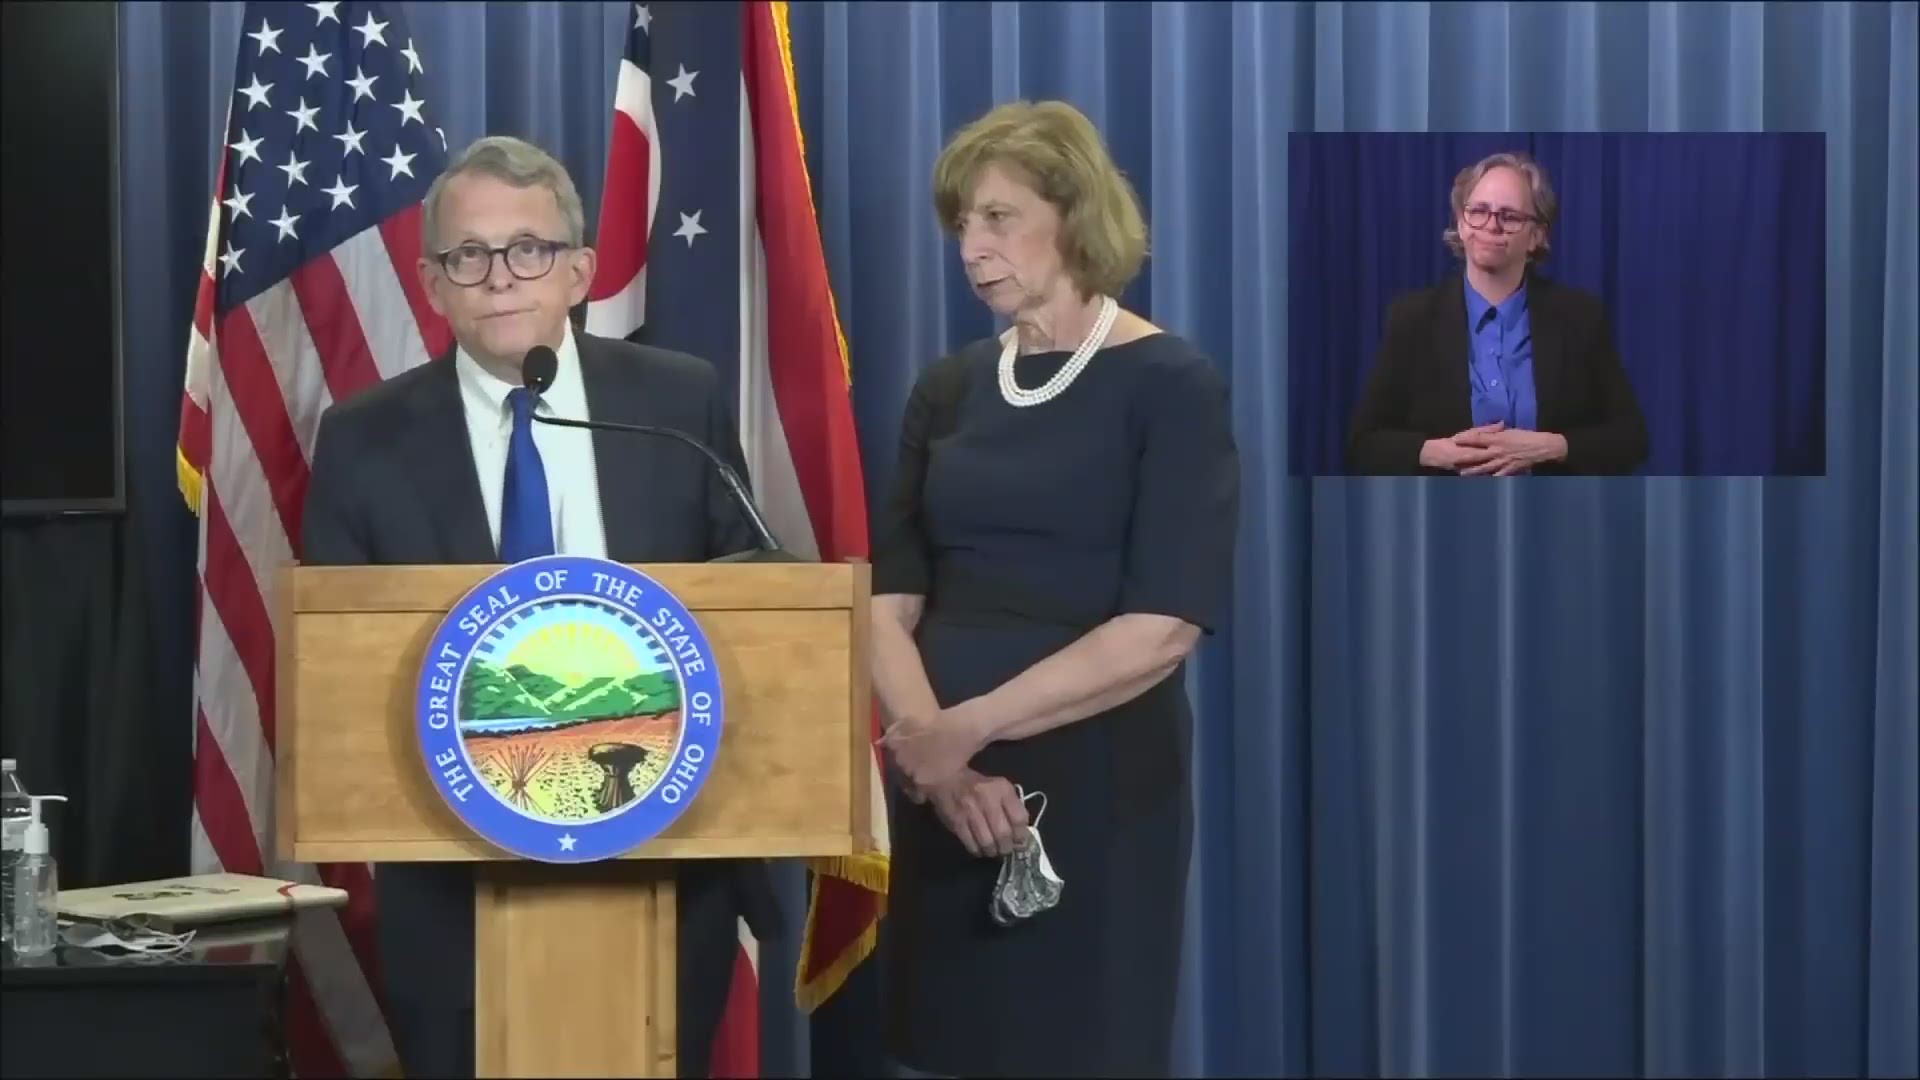 On Friday, Ohio Governor Mike DeWine called for protests and demonstrations over the killing of George Floyd to be peaceful.  There were also protest in Columbus.